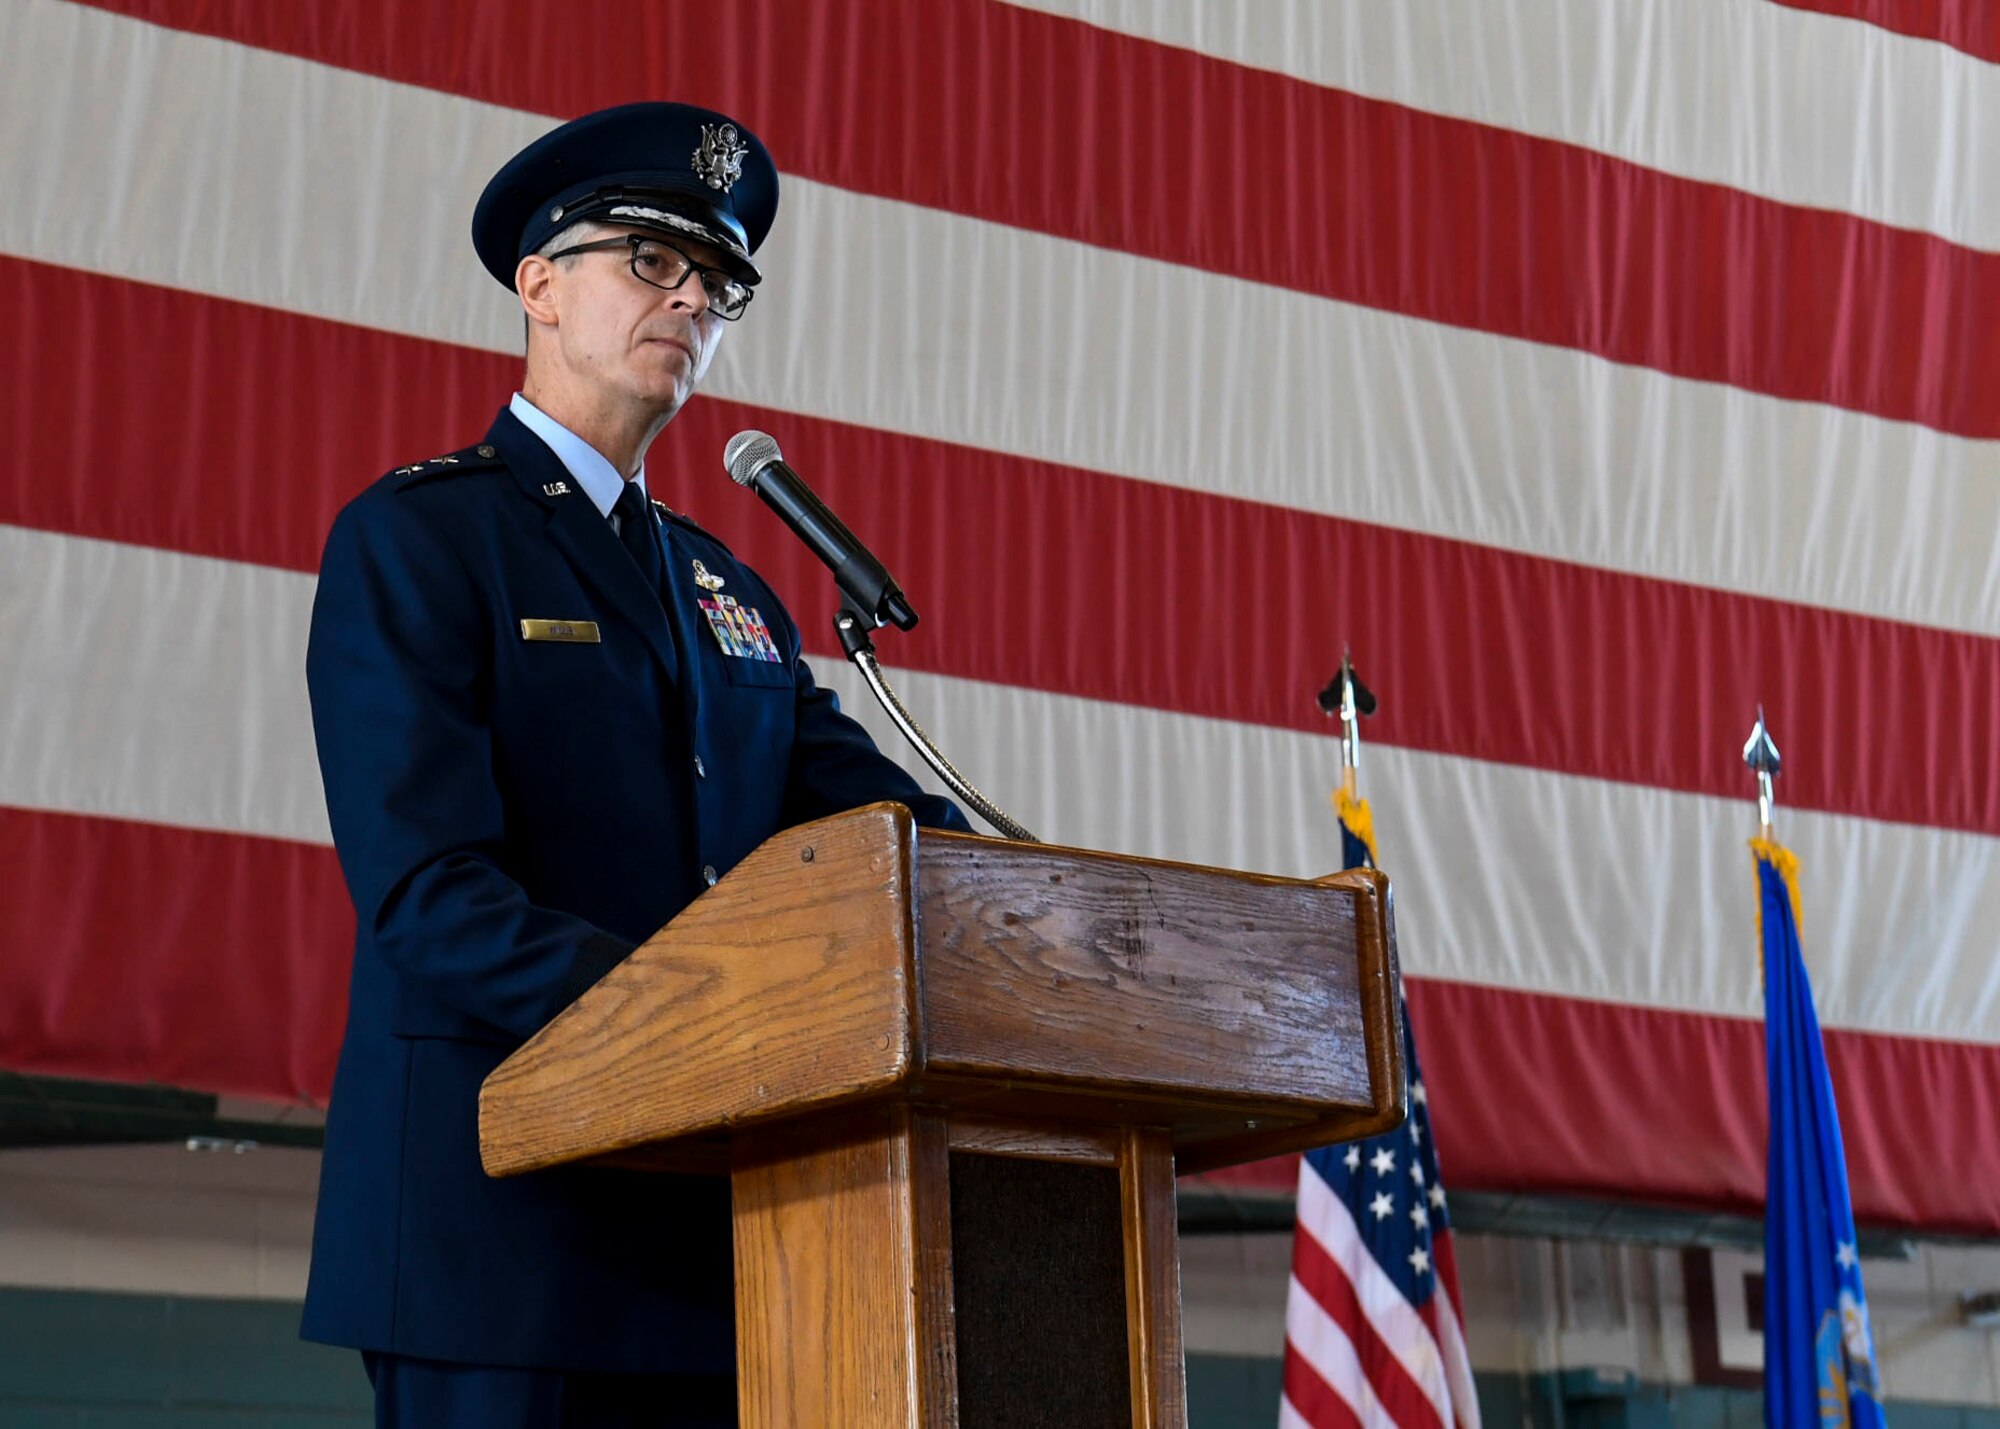 U.S. Air Force Maj. Gen. Craig D. Wills, 19th Air Force commander, speaks during a ceremony.